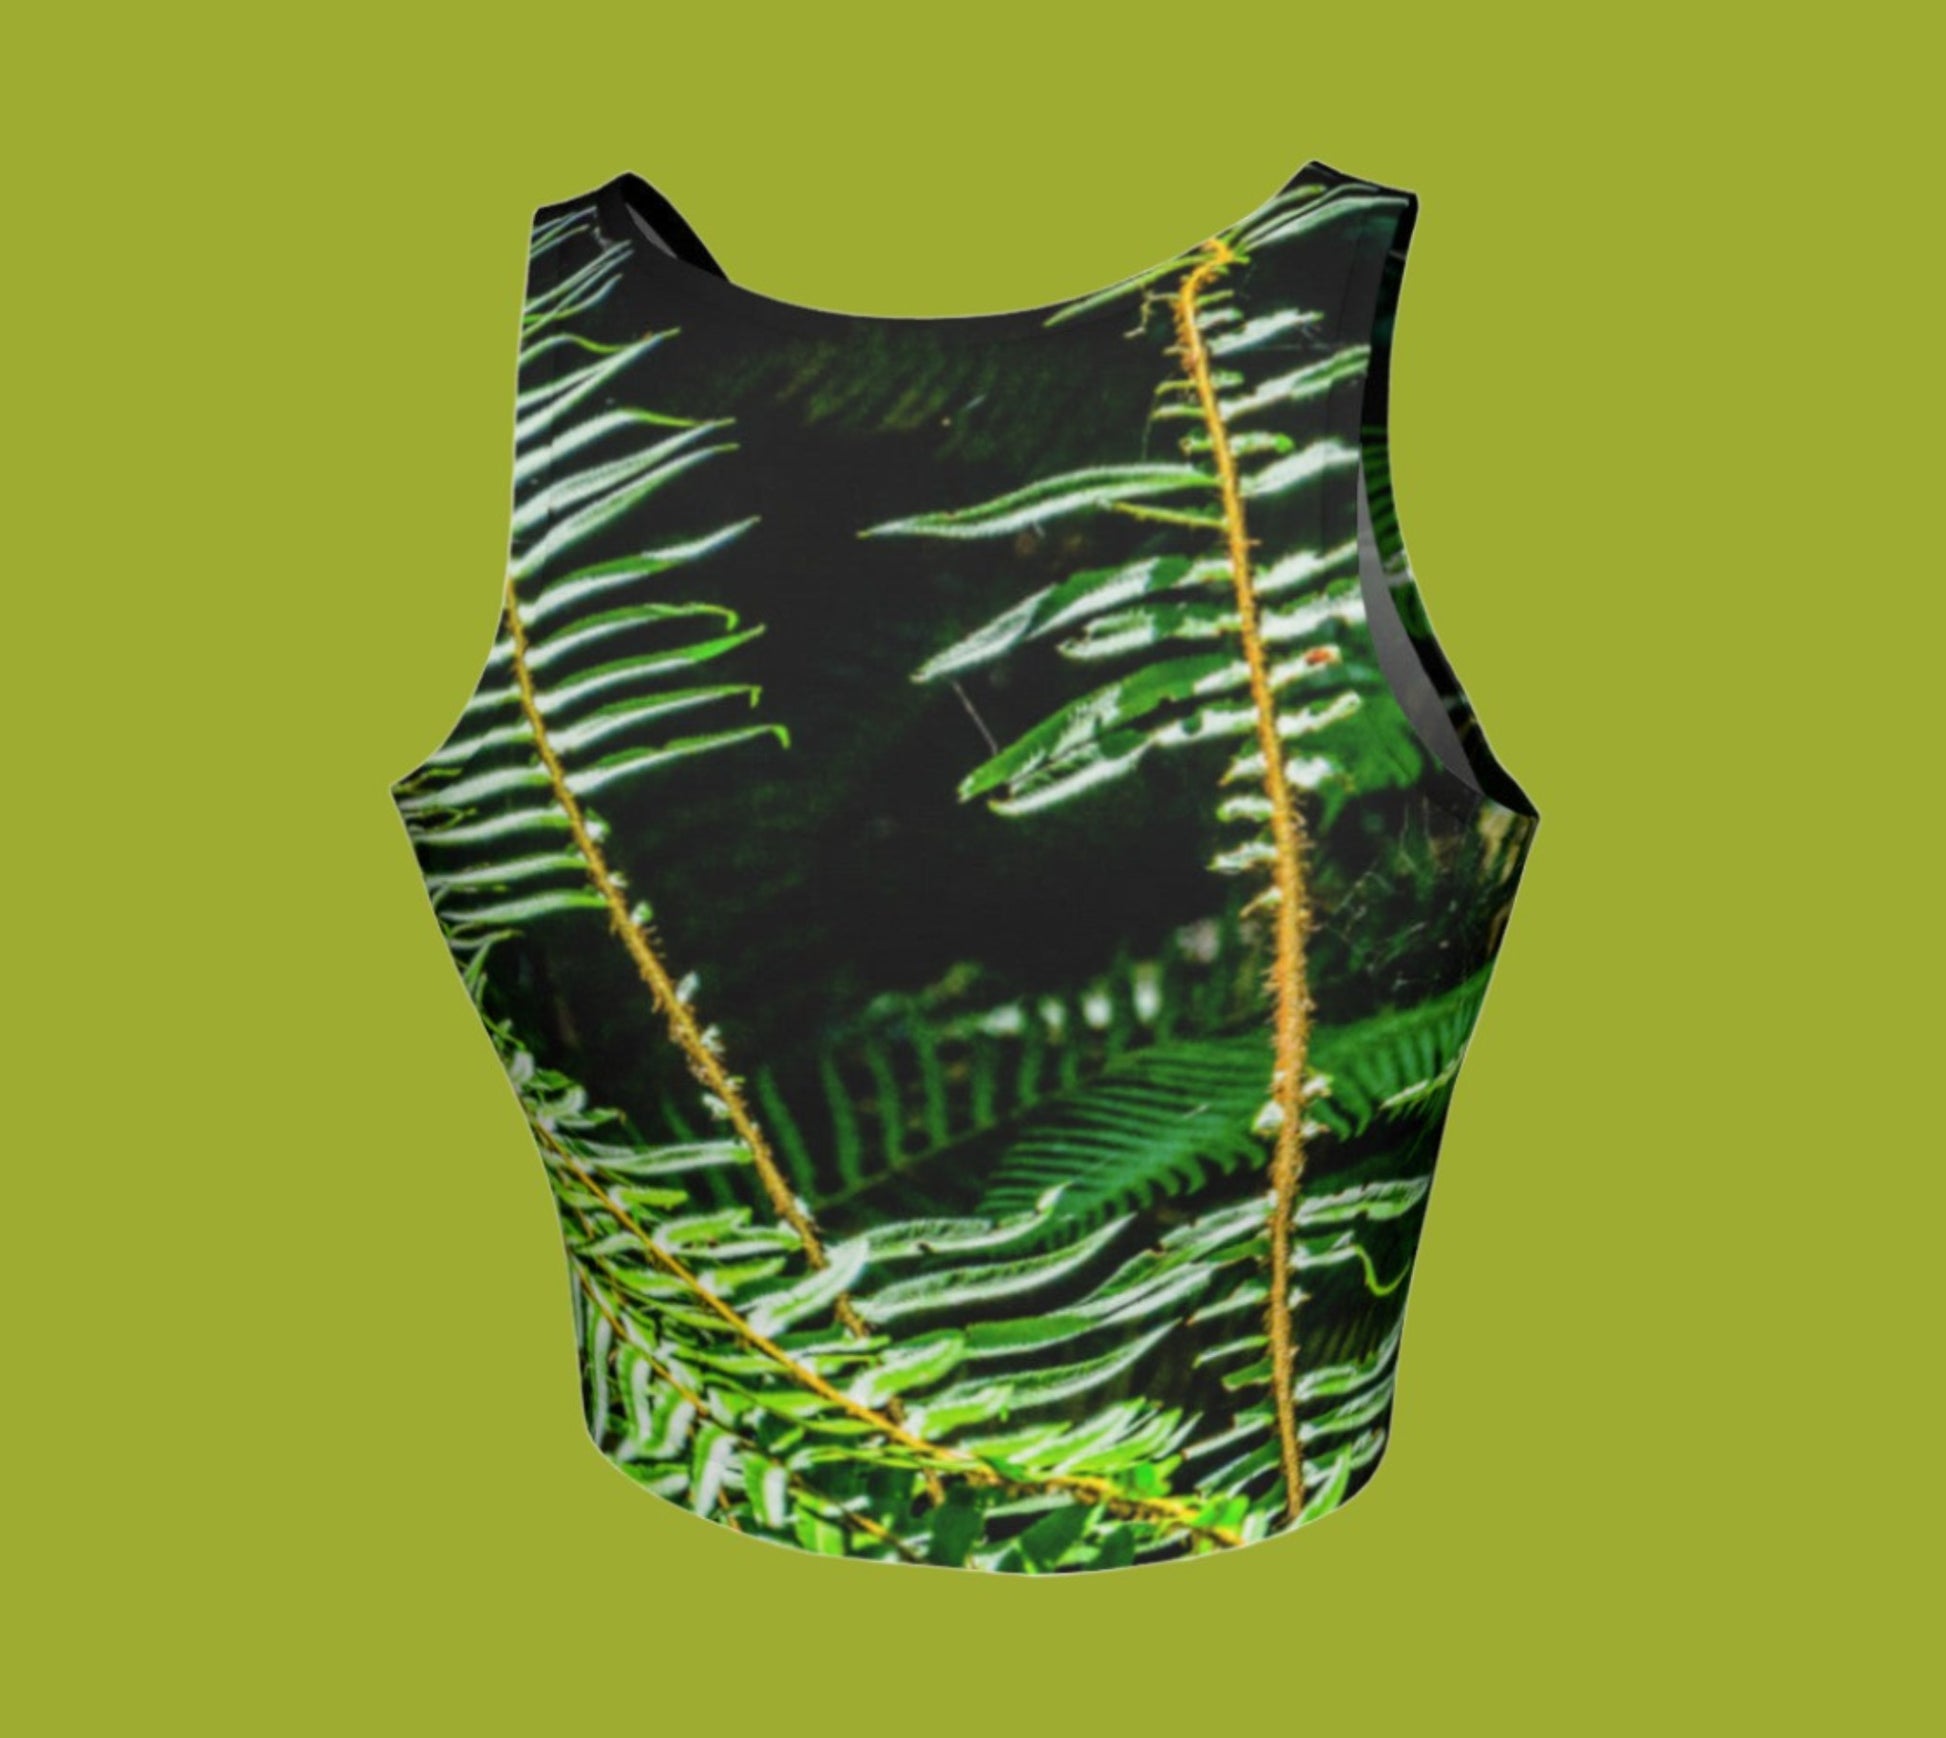 Rainforest Athletic Crop Top  Rainforest artwork by Roxy Hurtubise   Made to move with you!  Wear for your daily workouts, yoga, beach volleyball or as a bathing suit top!  Your Van Isle Goddess athletic crop top pairs up with our yoga or classic leggings and capris. Crop tops also look great with shorts, mini shorts, skirts fitted or flared.